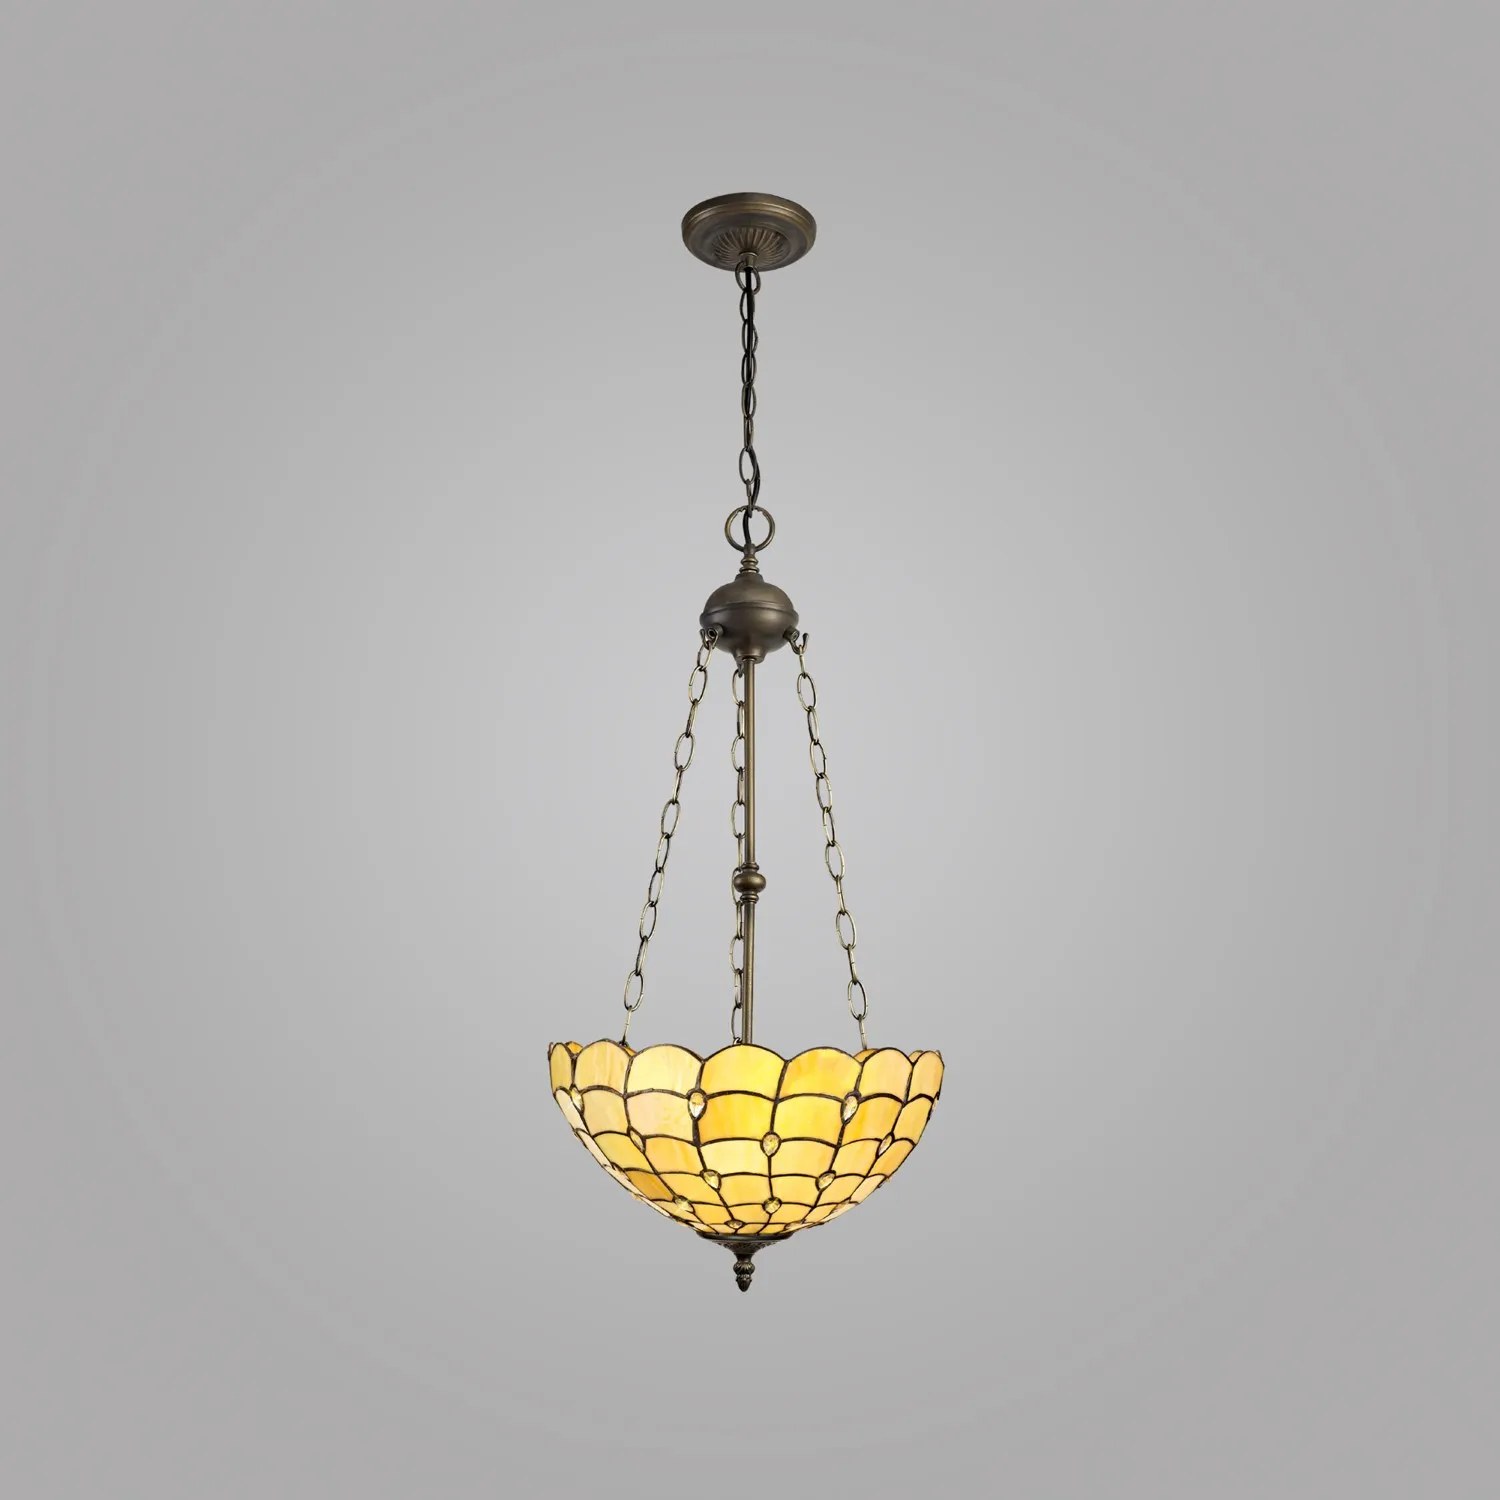 Stratford 3 Light Uplighter Pendant E27 With 40cm Tiffany Shade, Beige Clear Crystal Aged Antique Brass